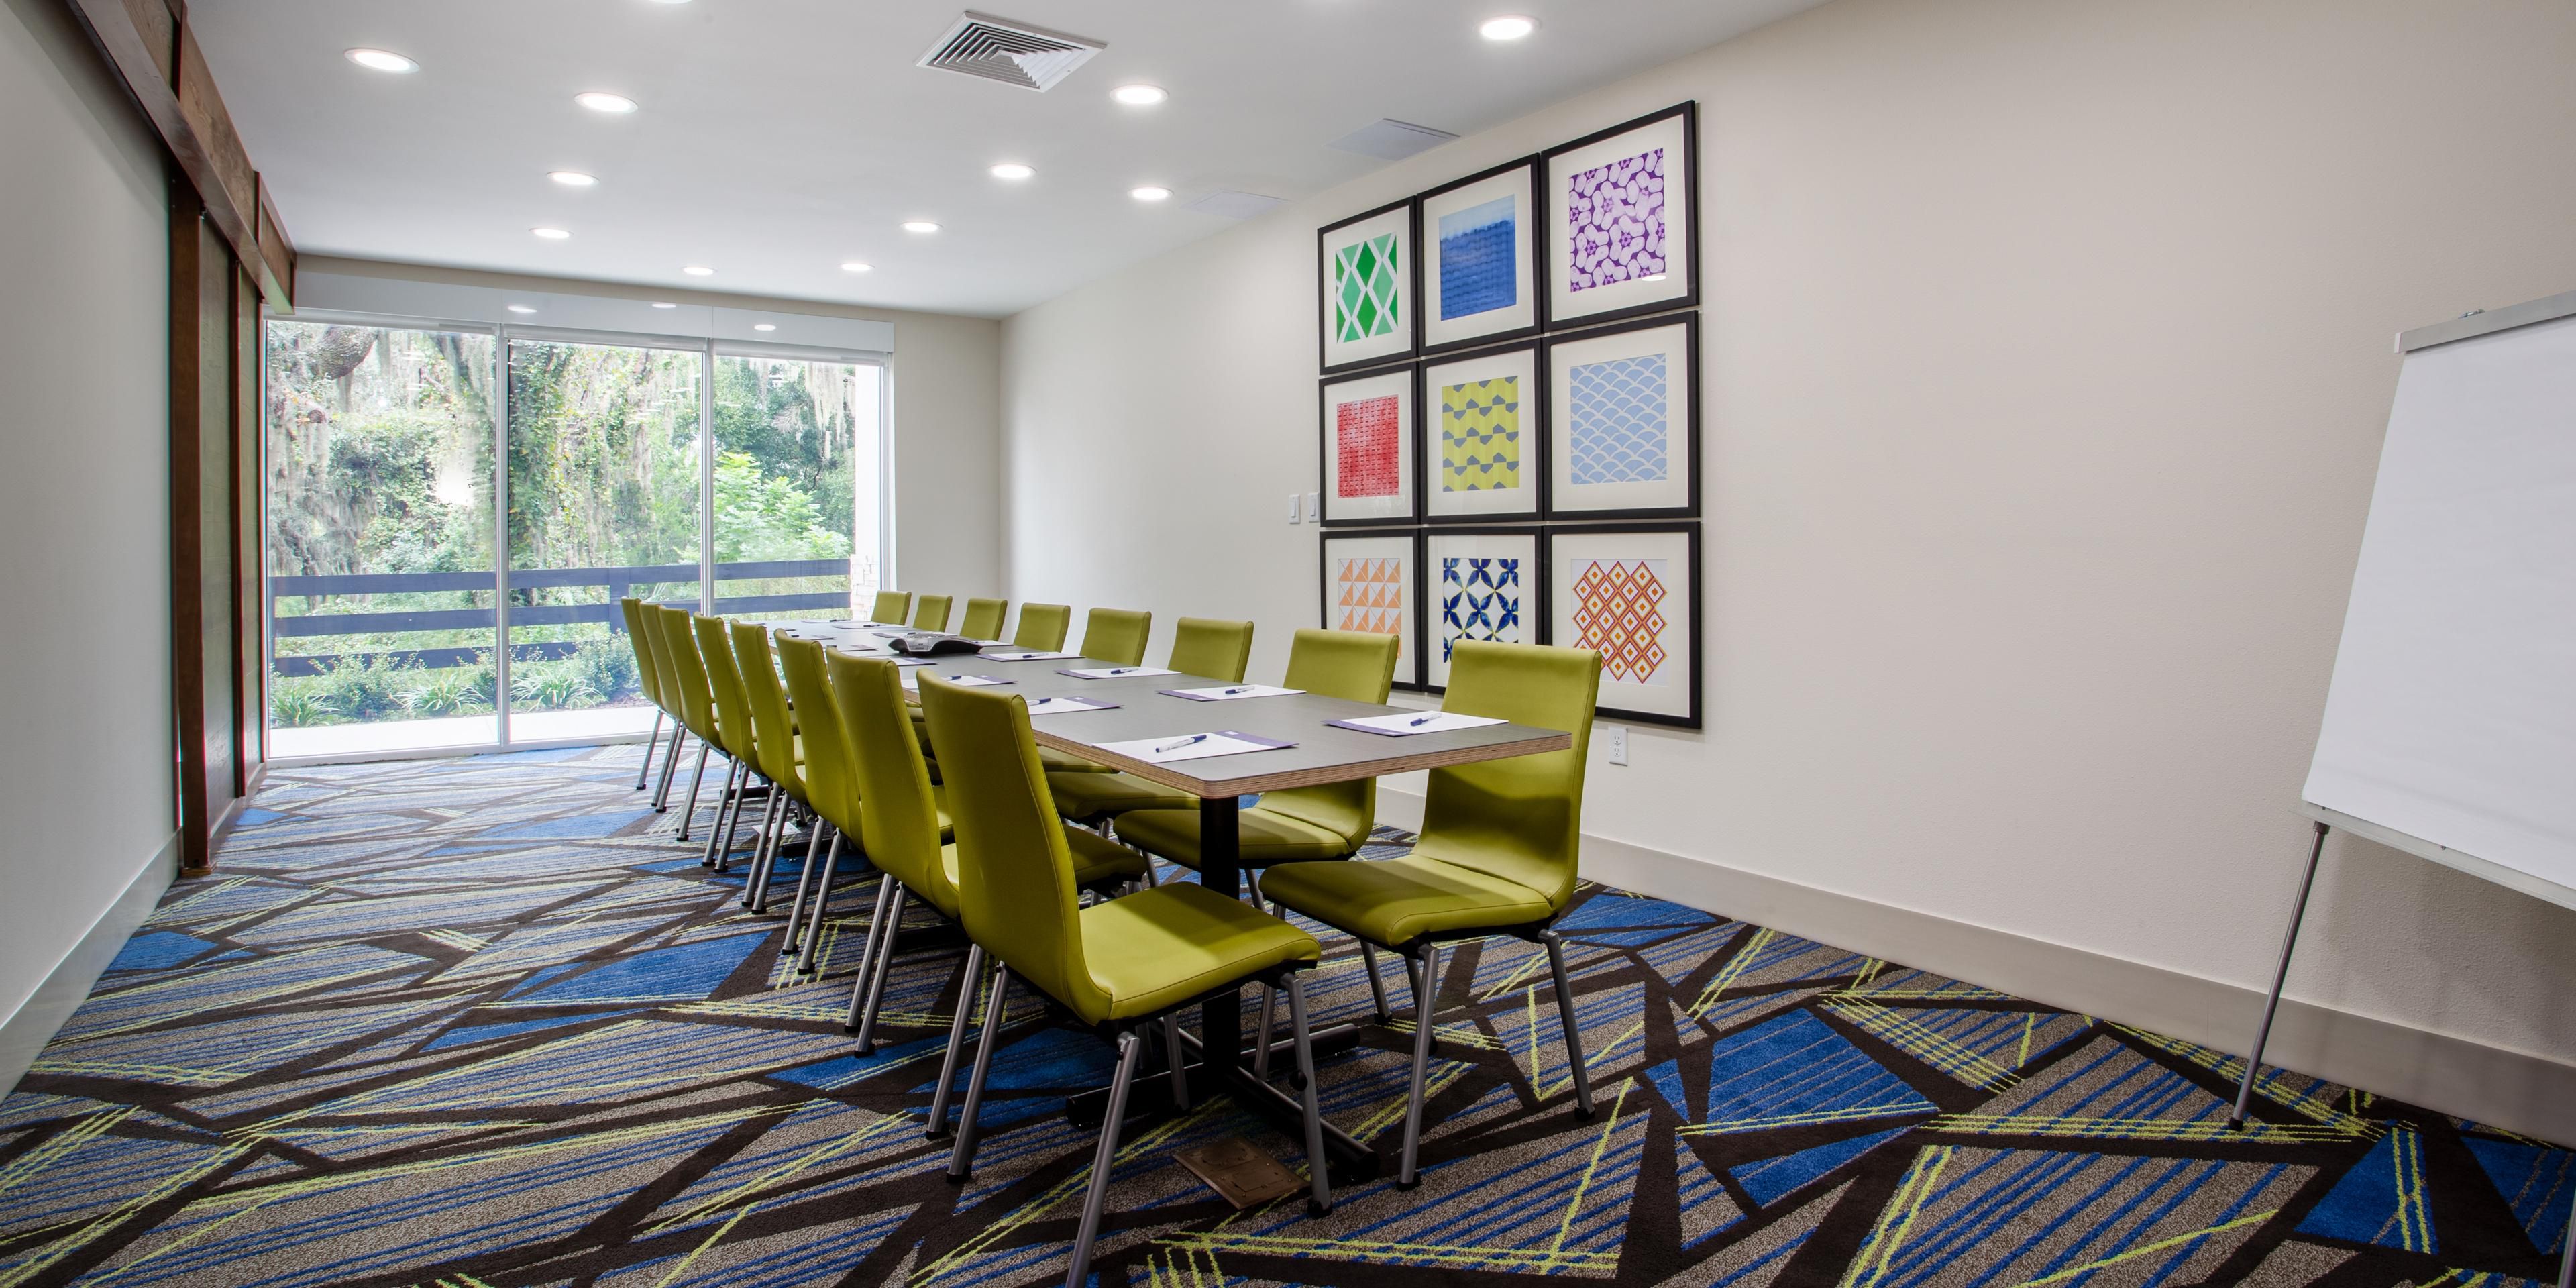 Our meeting space is the perfect spot for small meetings and events. The room is equipped with an extra-large flat-panel TV with connections for your devices. It is next to the lobby/breakfast area, great for breakouts or meals. But oh the view... you cannot beat our floor-to-ceiling window view of natural Florida!